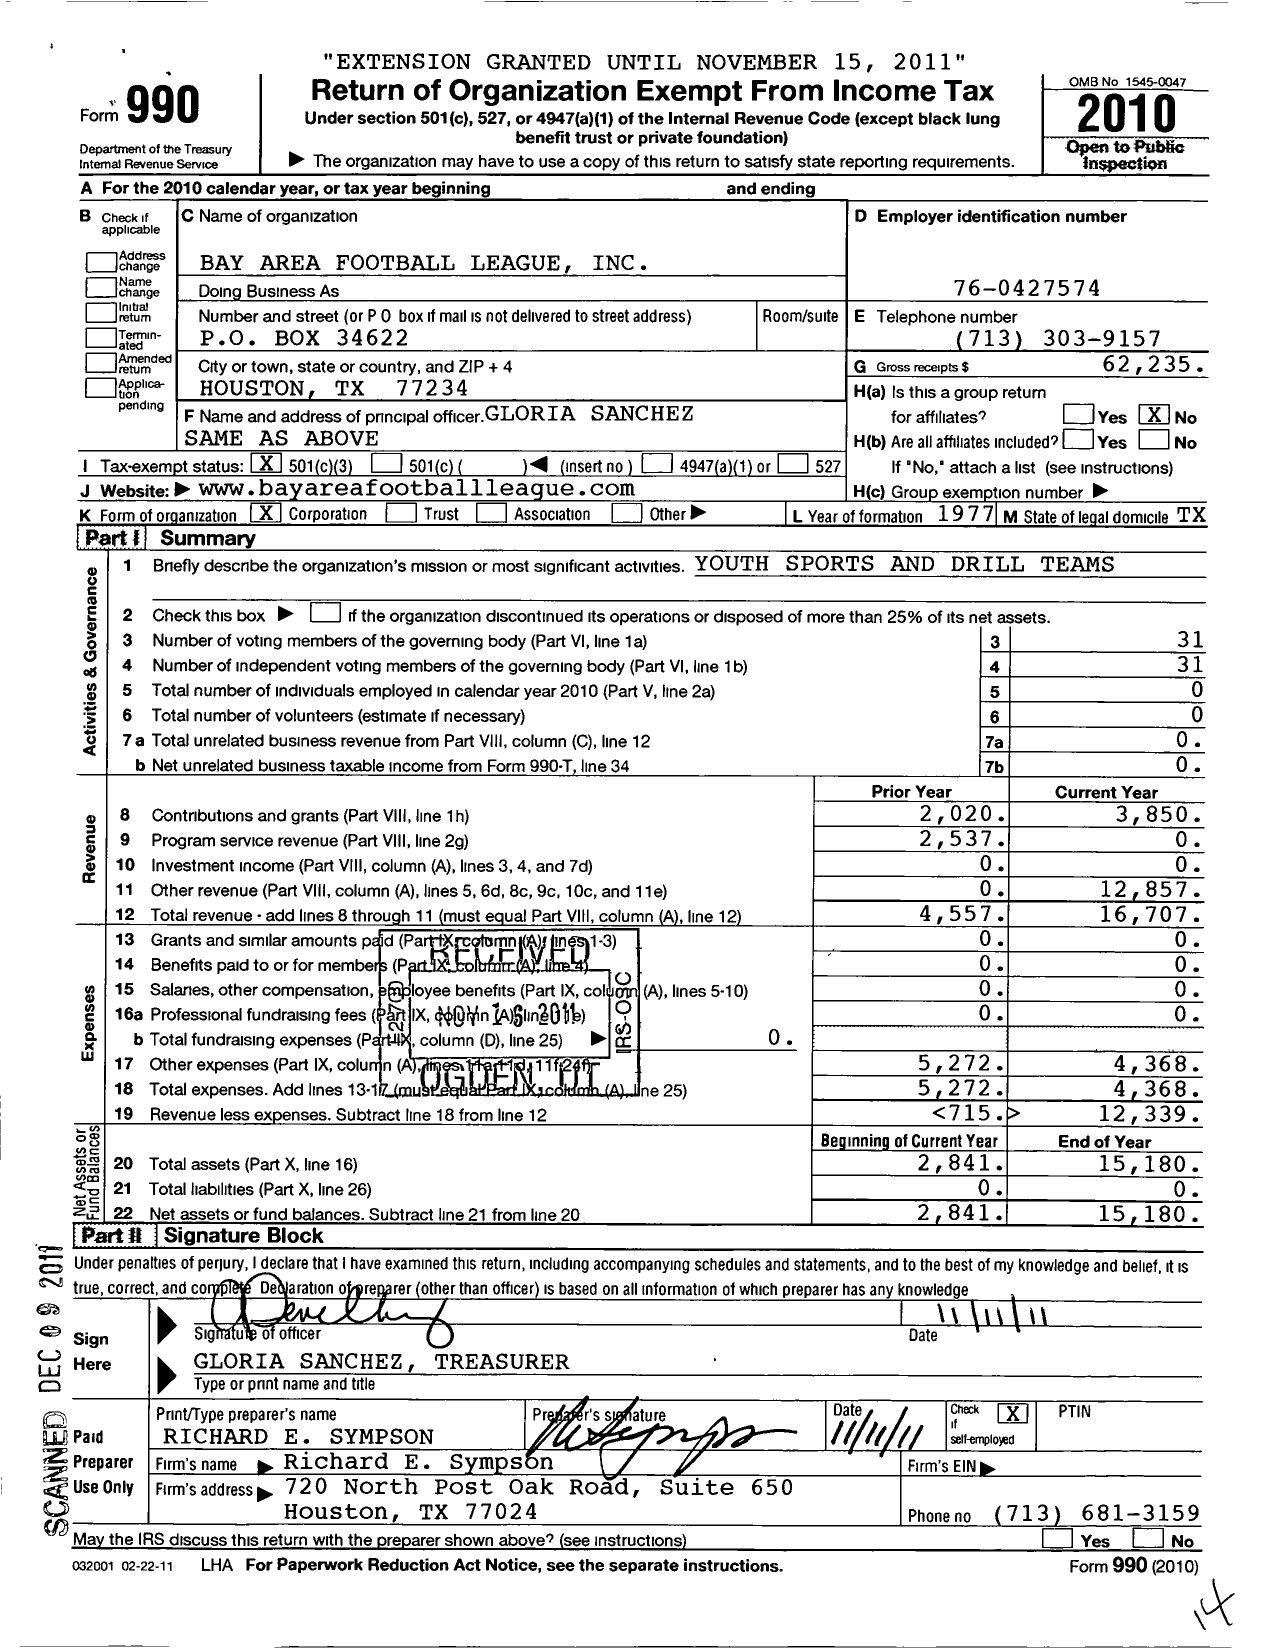 Image of first page of 2010 Form 990 for Bay Area Football League